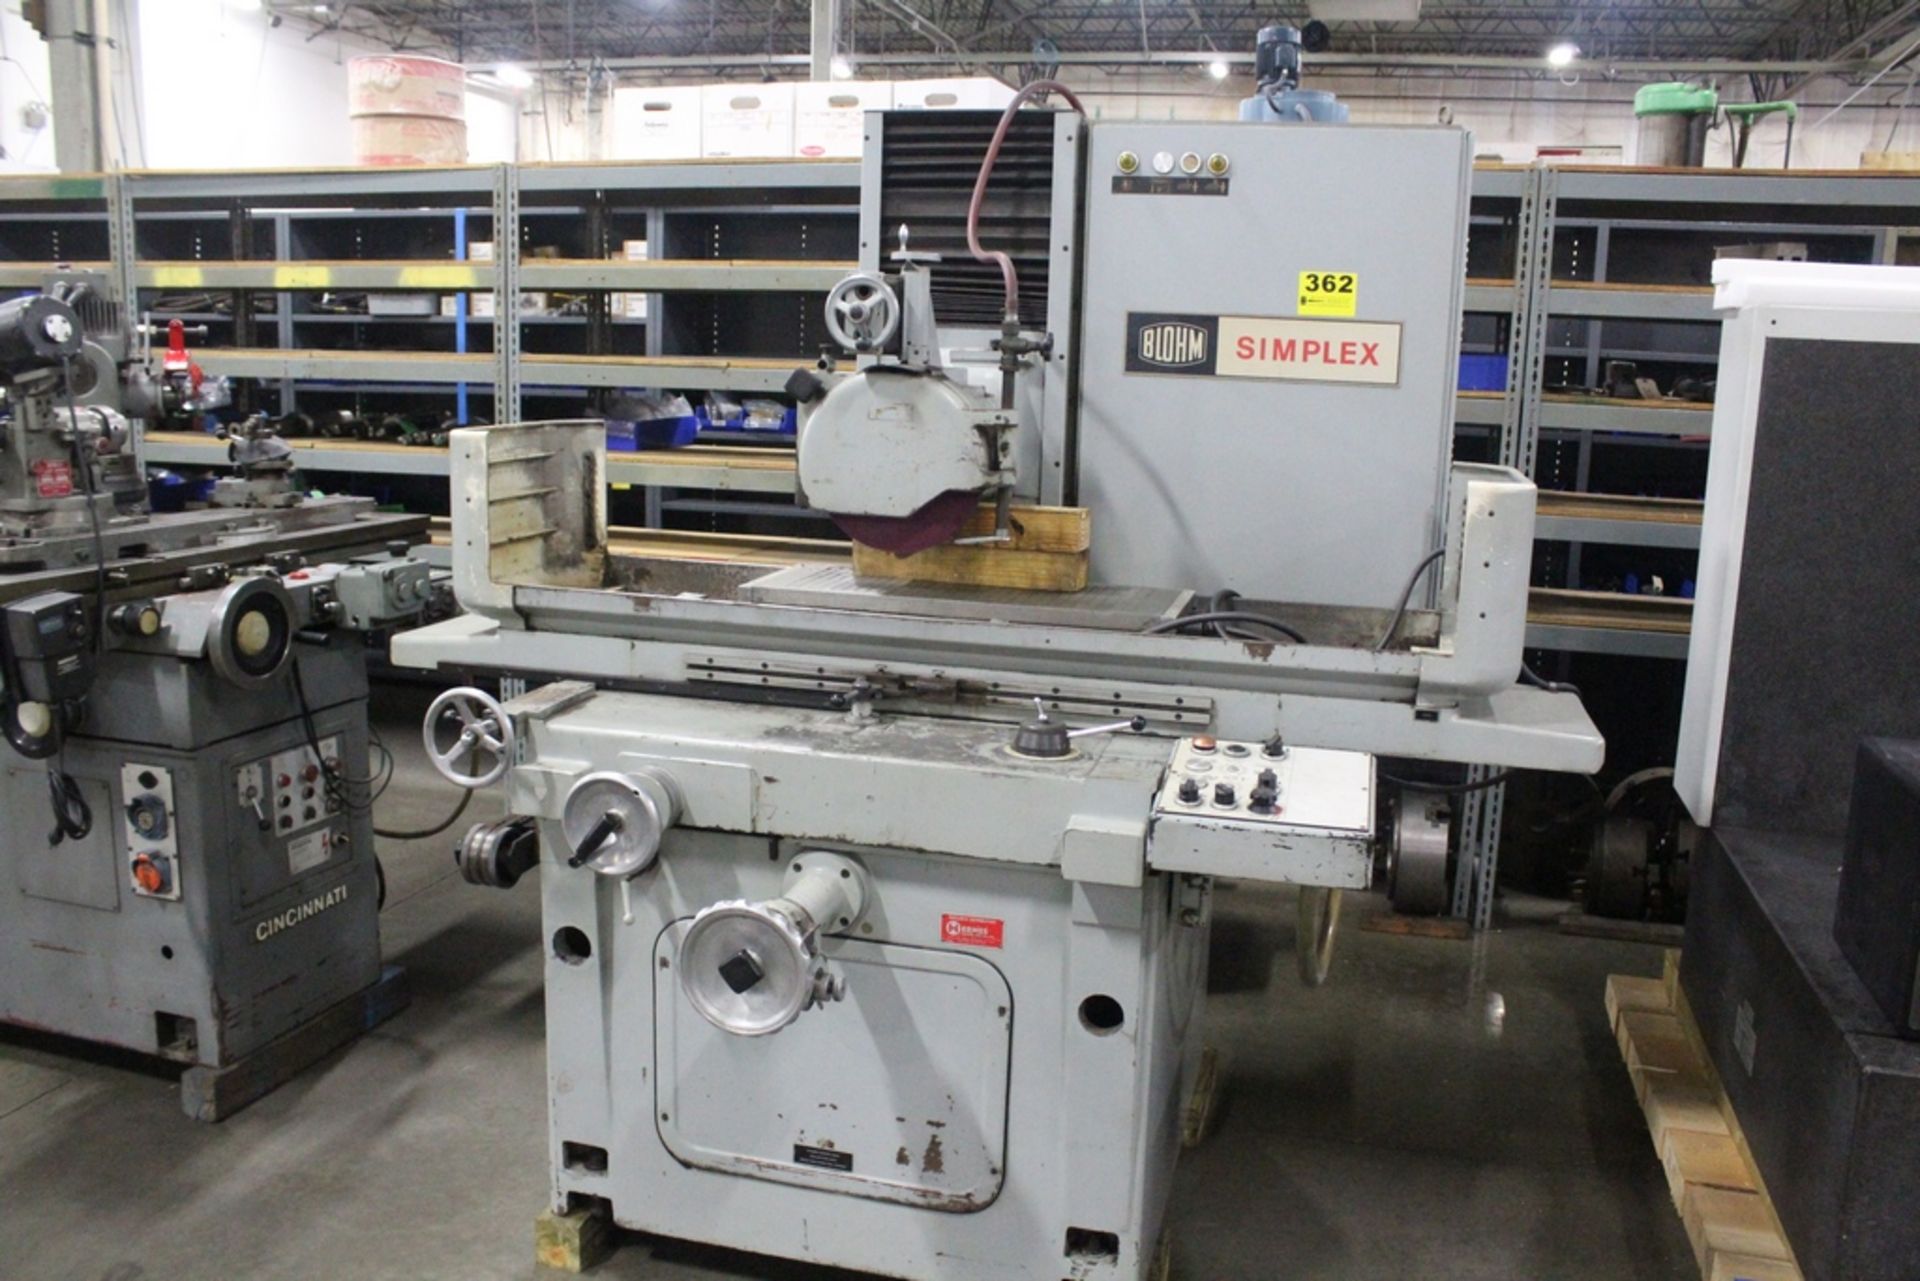 BLOHM MODEL SIMPLEX 7 12” X 30” SURFACE GRINDER S/N 8388 WITH SIMPLEX CONTROL 2 AXIS AUTOMATIC , 12”